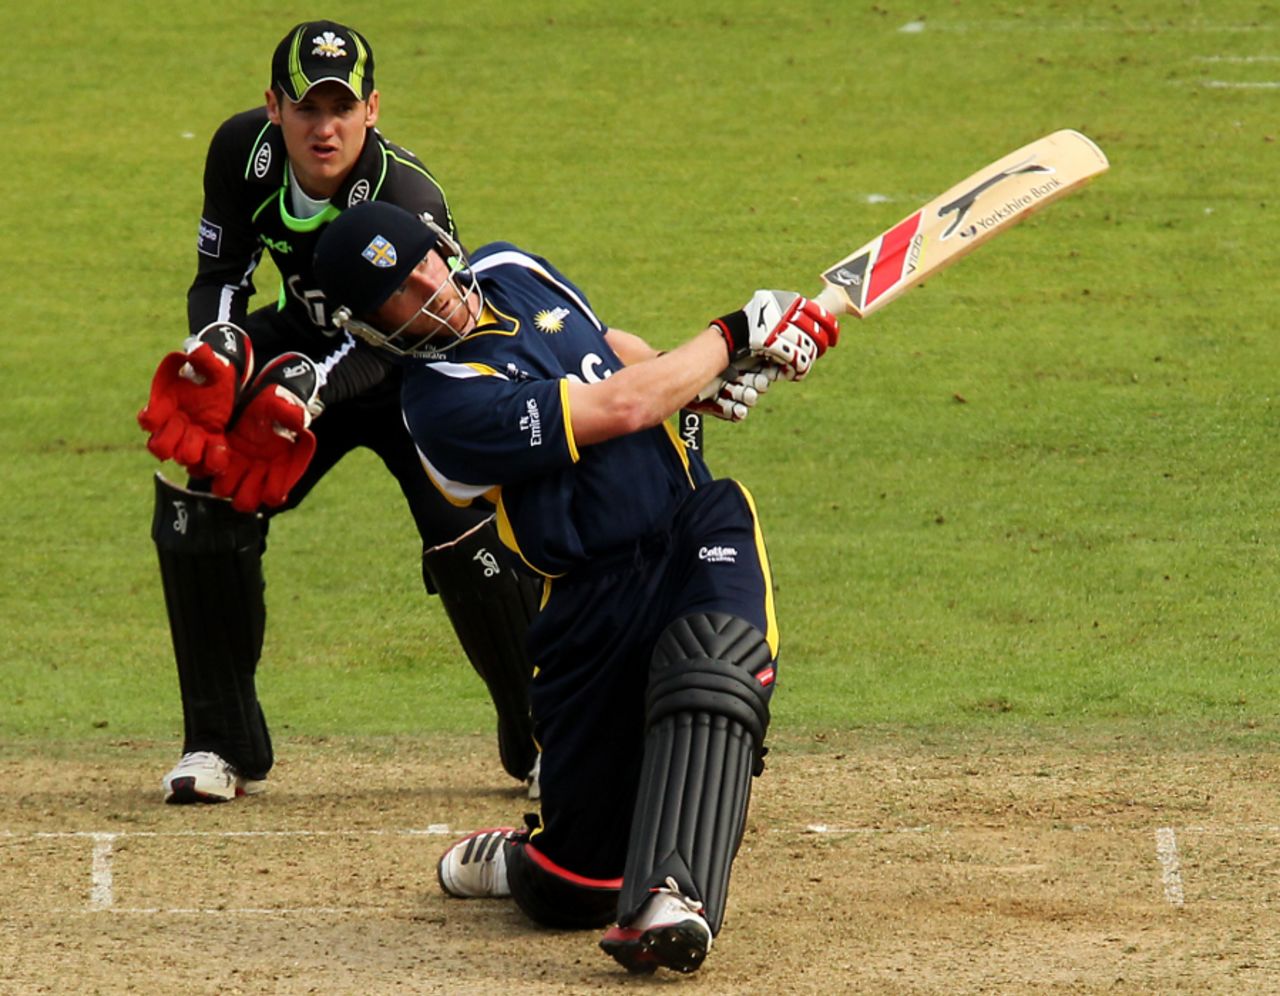 Paul Collingwood heaves to leg during his 96, Surrey v Durham, Clydesdale Bank 40, The Oval, August 29 2011